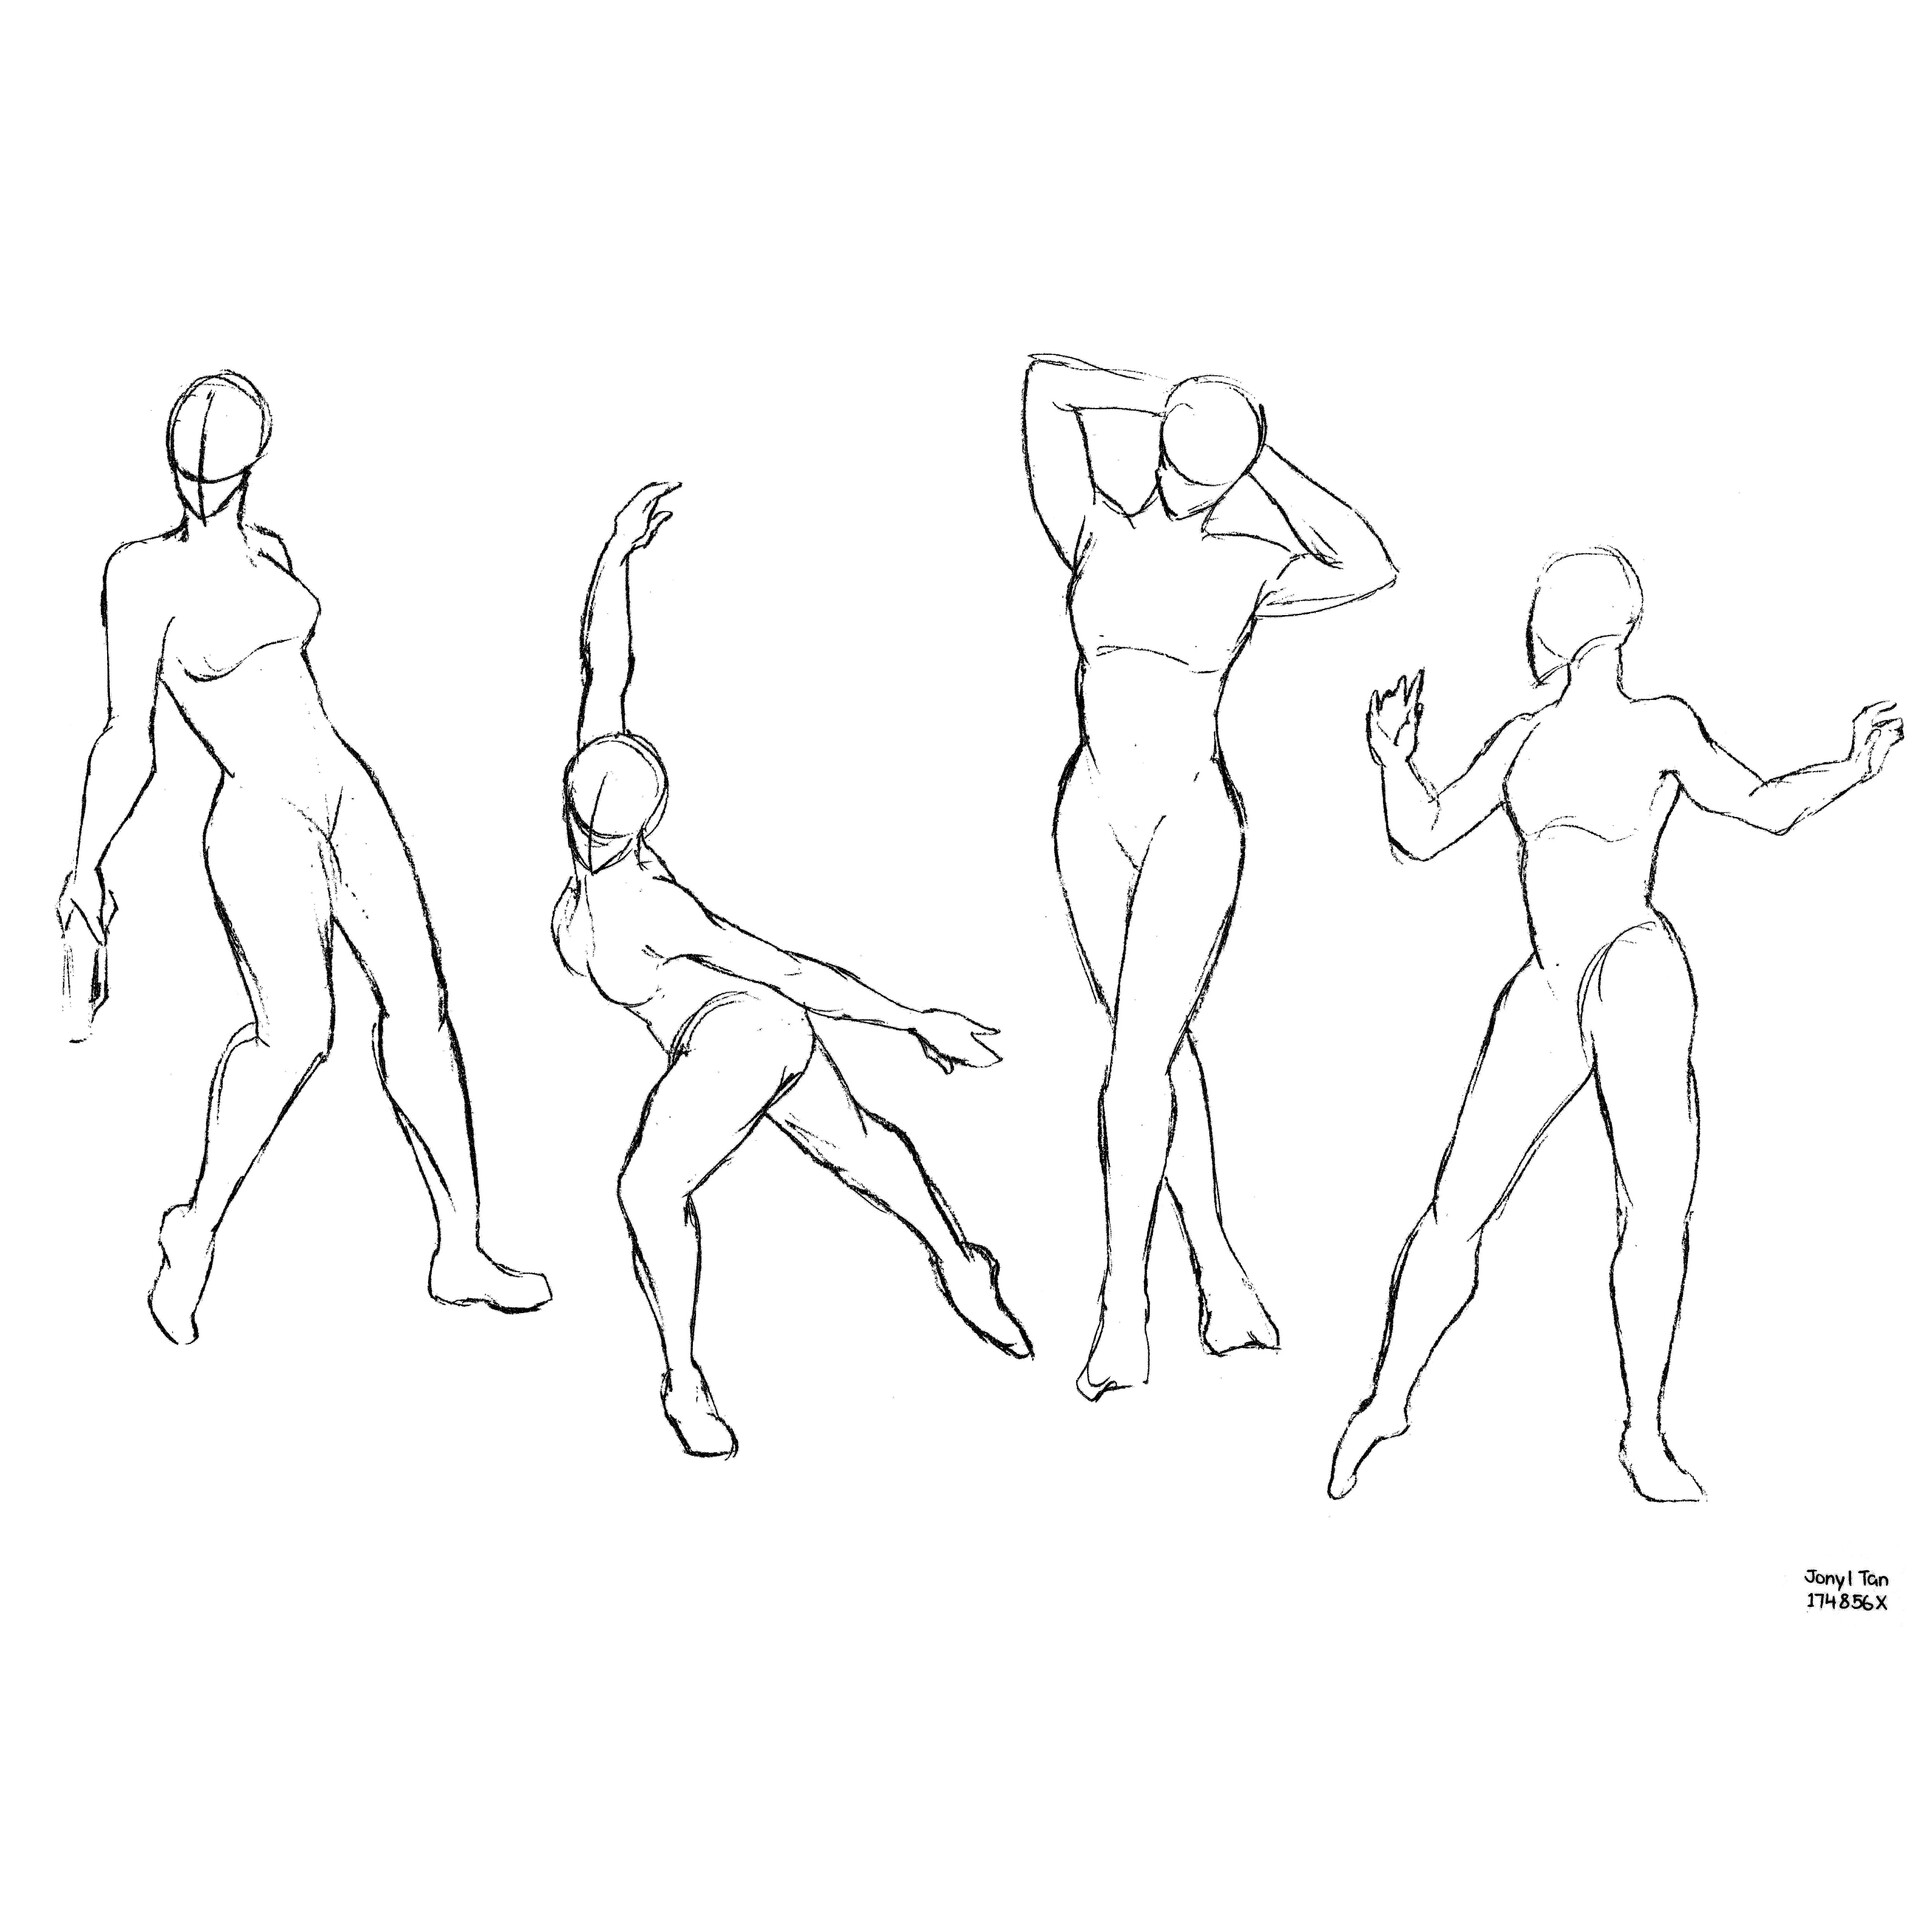 Gesture Drawing - The Ultimate Guide For Beginners